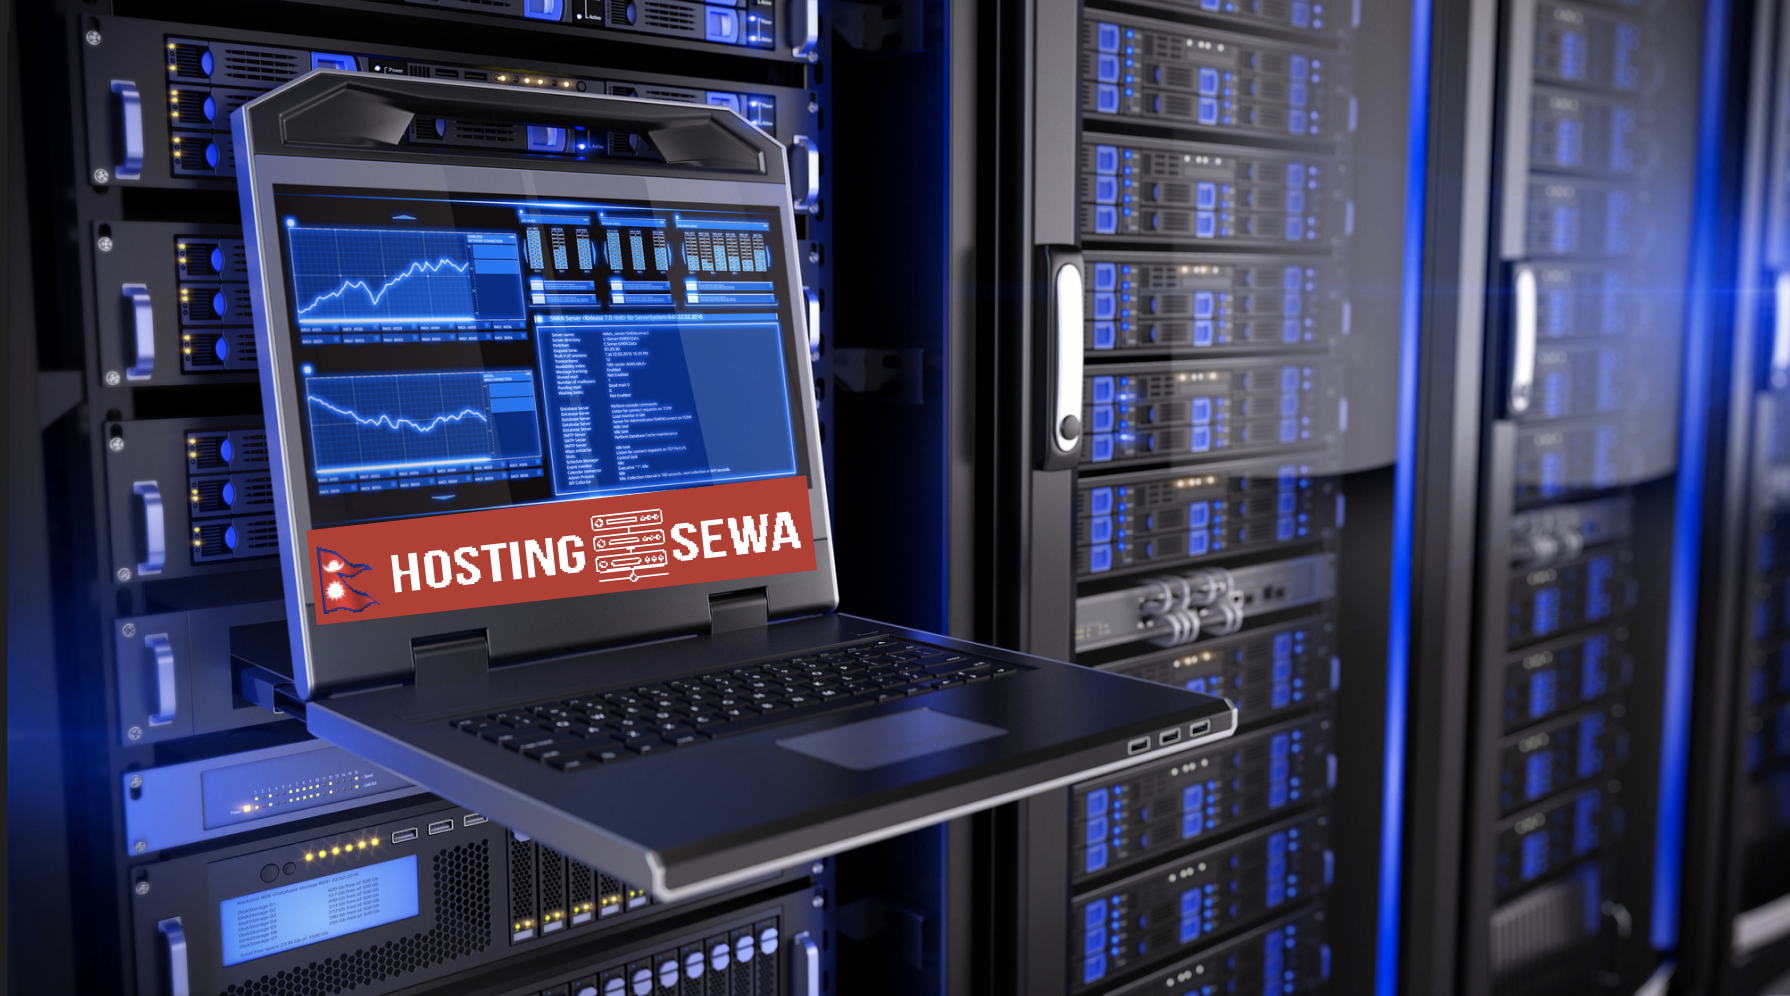 Grow Your Hosting Business with HostingSewa - Reseller Hosting  in Nepal